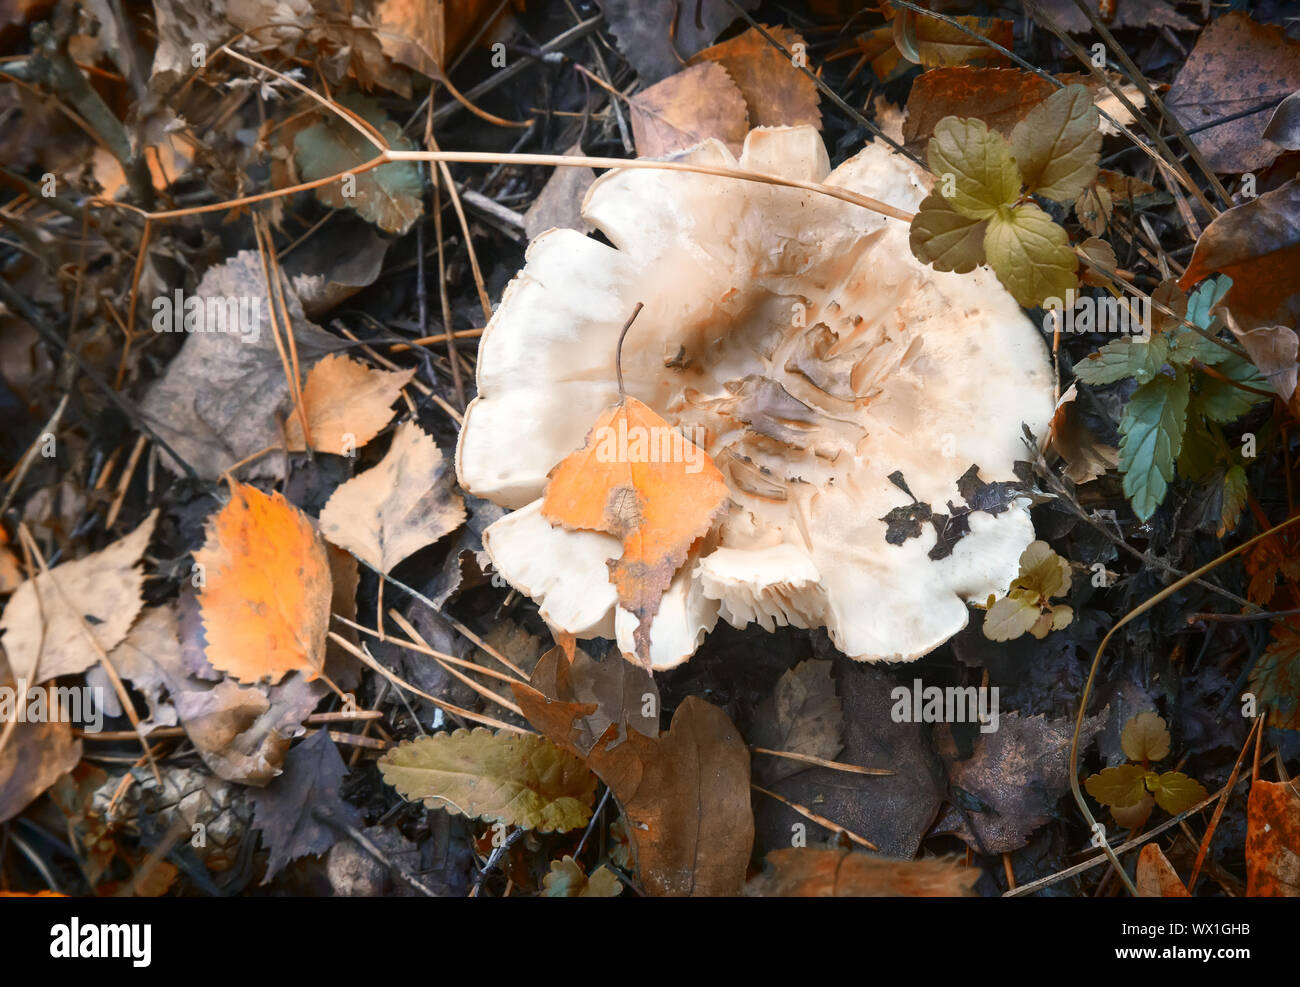 Russula mushroom in the autumn forest. Stock Photo